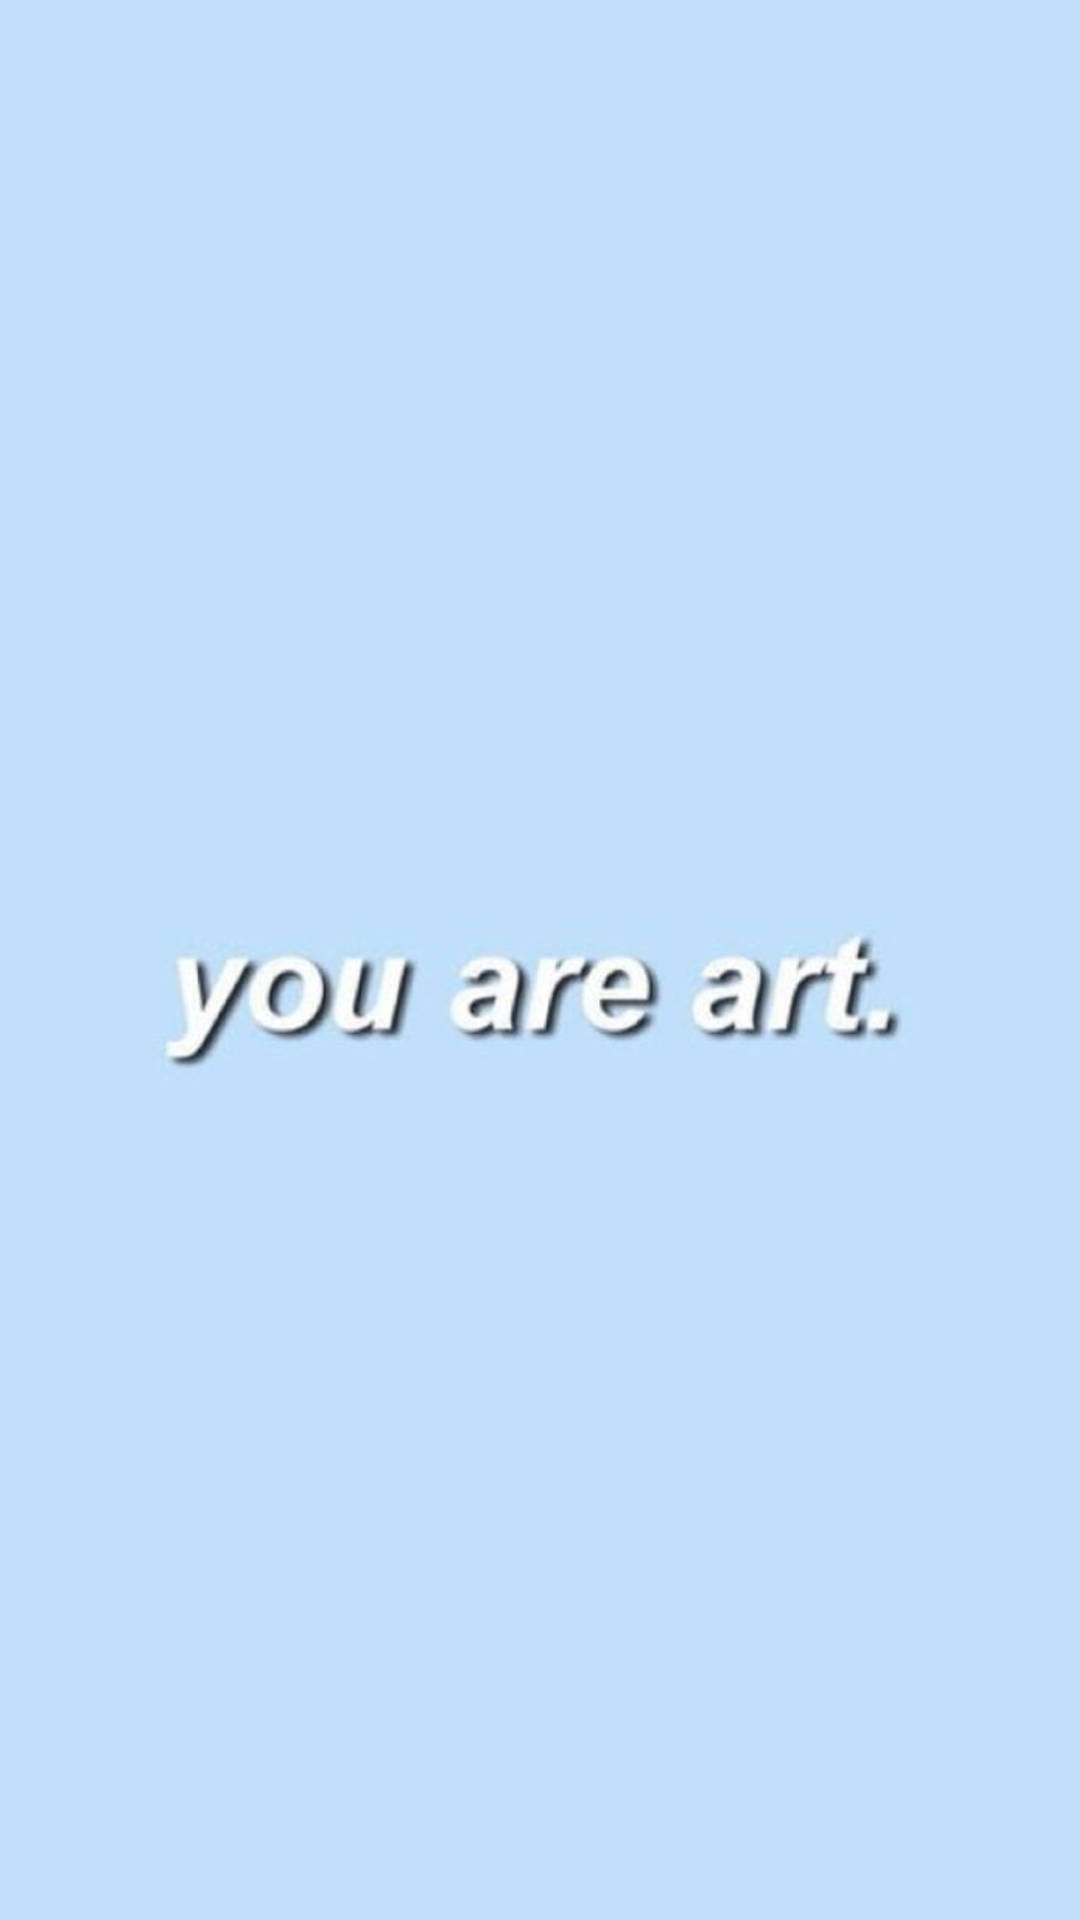 Download You Are Art Light Blue Aesthetic iPhone Wallpaper | Wallpapers.com